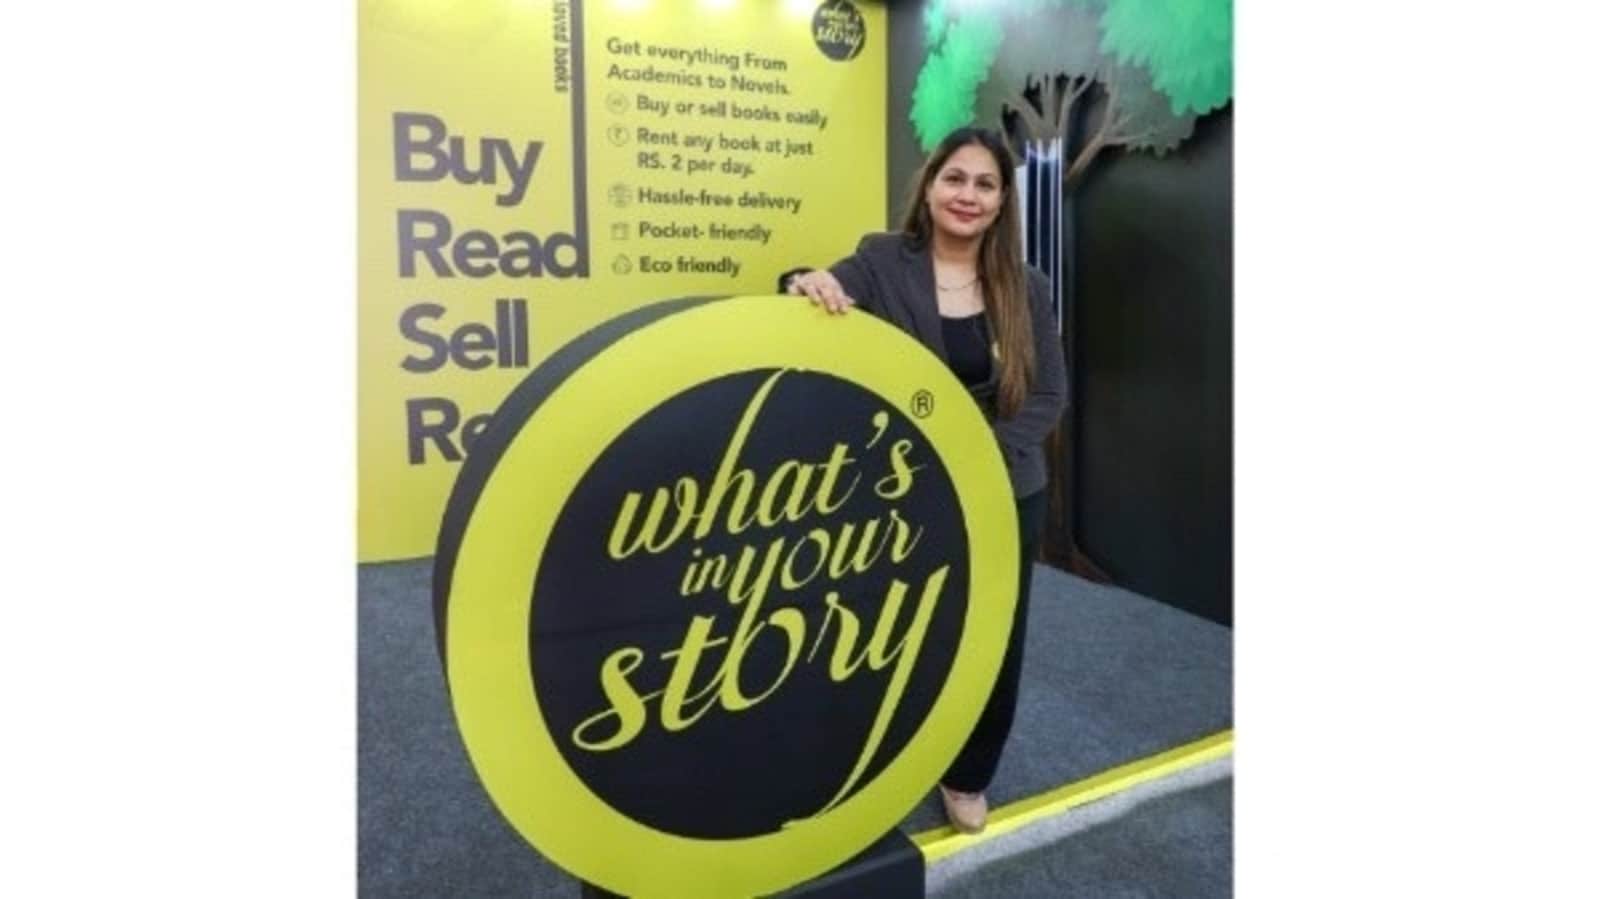 What’s in your story- Best Online marketplace in India to buy, sell, rent books